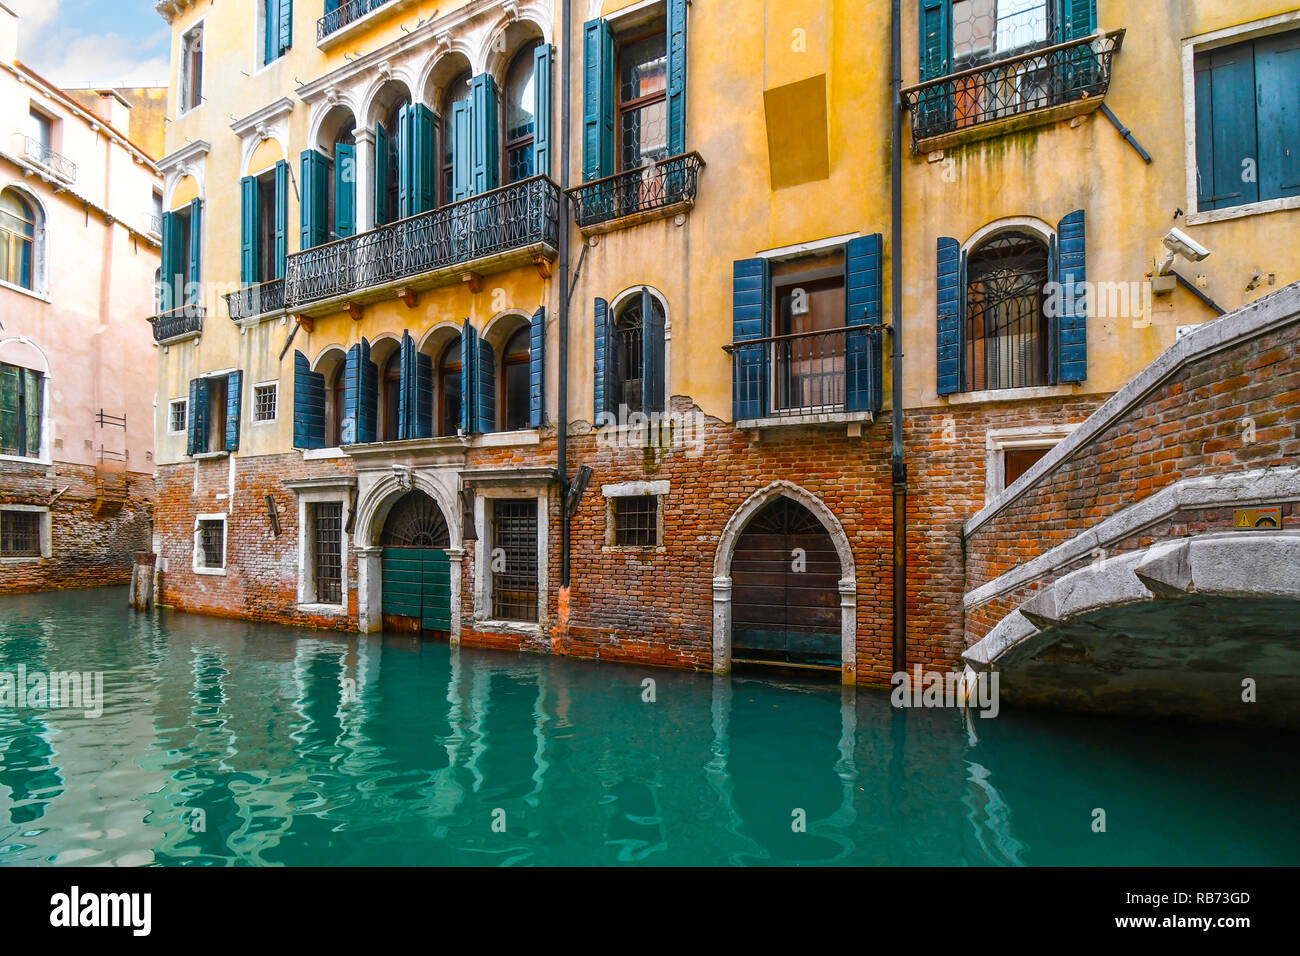 A typical, picturesque and colorful residential canal in the historic center of Venice, Italy with emerald green water. Stock Photo